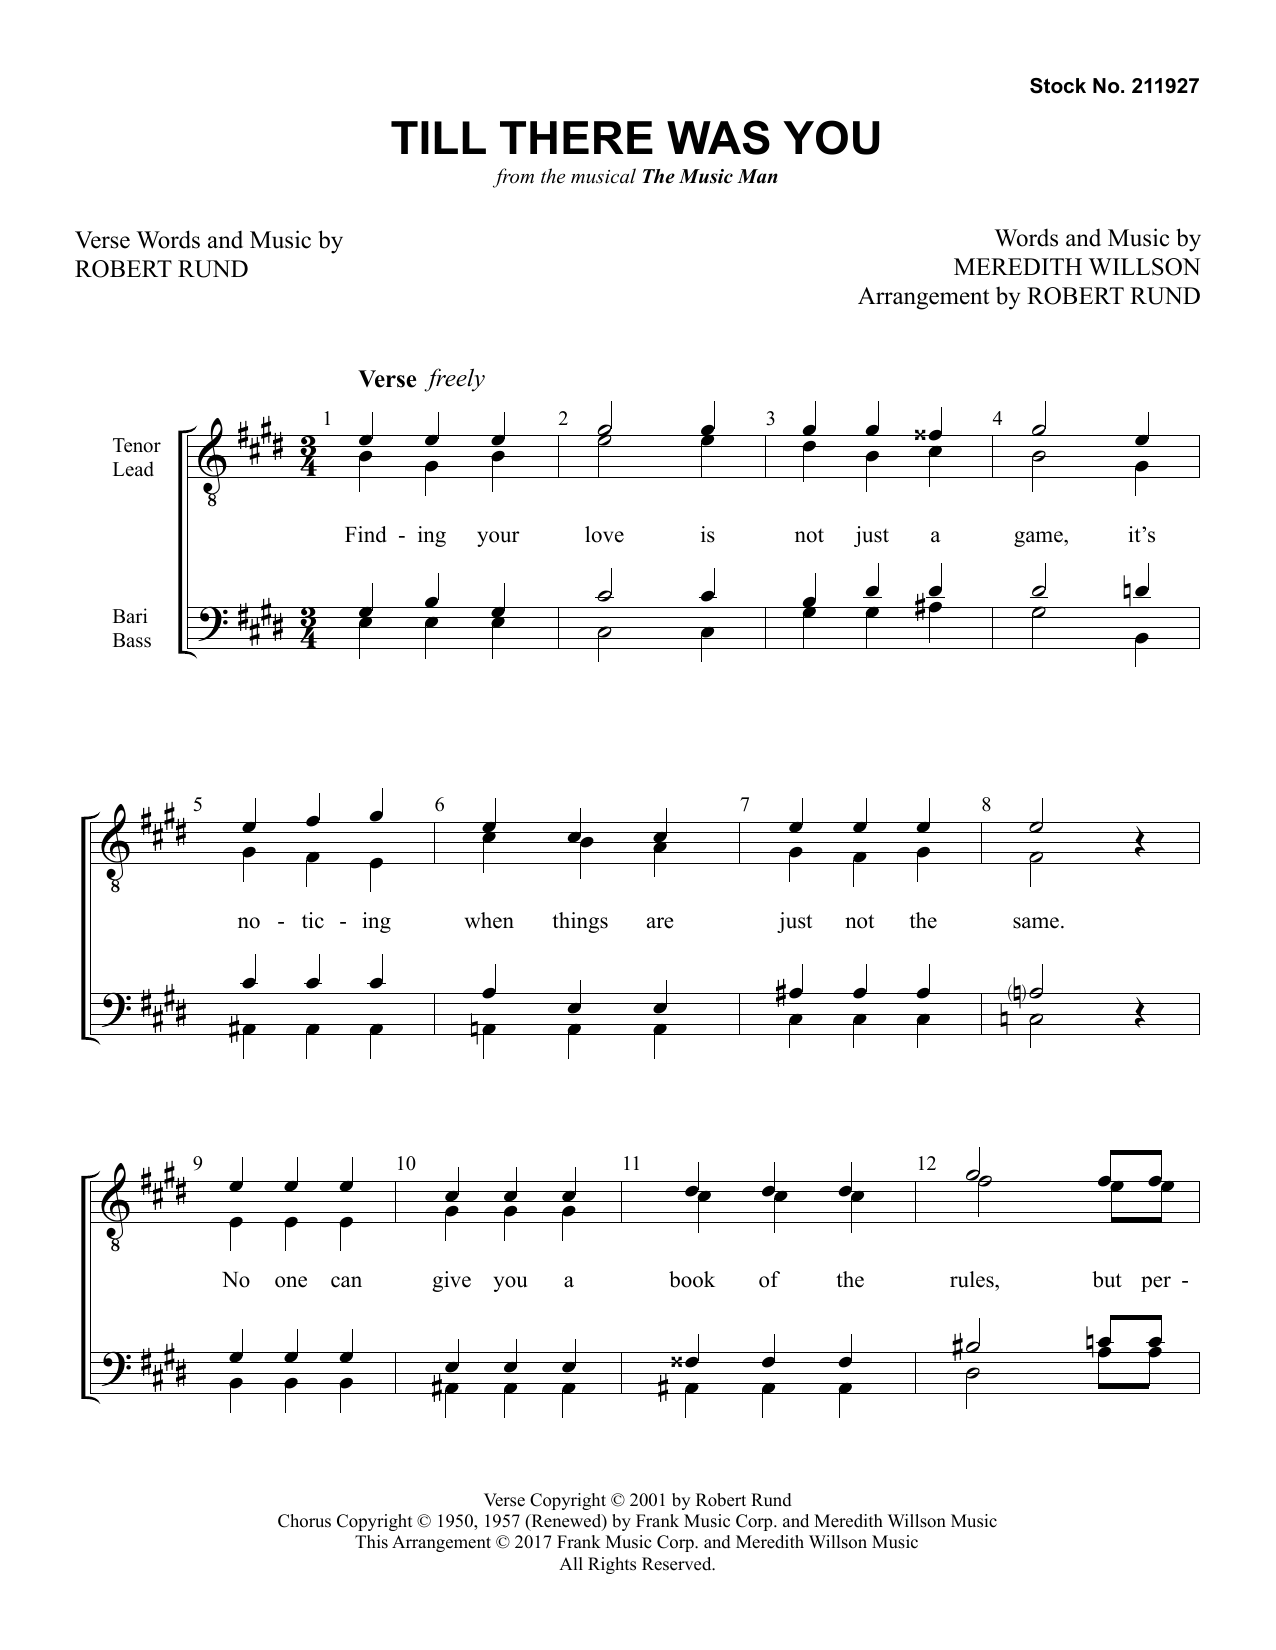 Download Meredith Willson Till There Was You (from The Music Man) Sheet Music